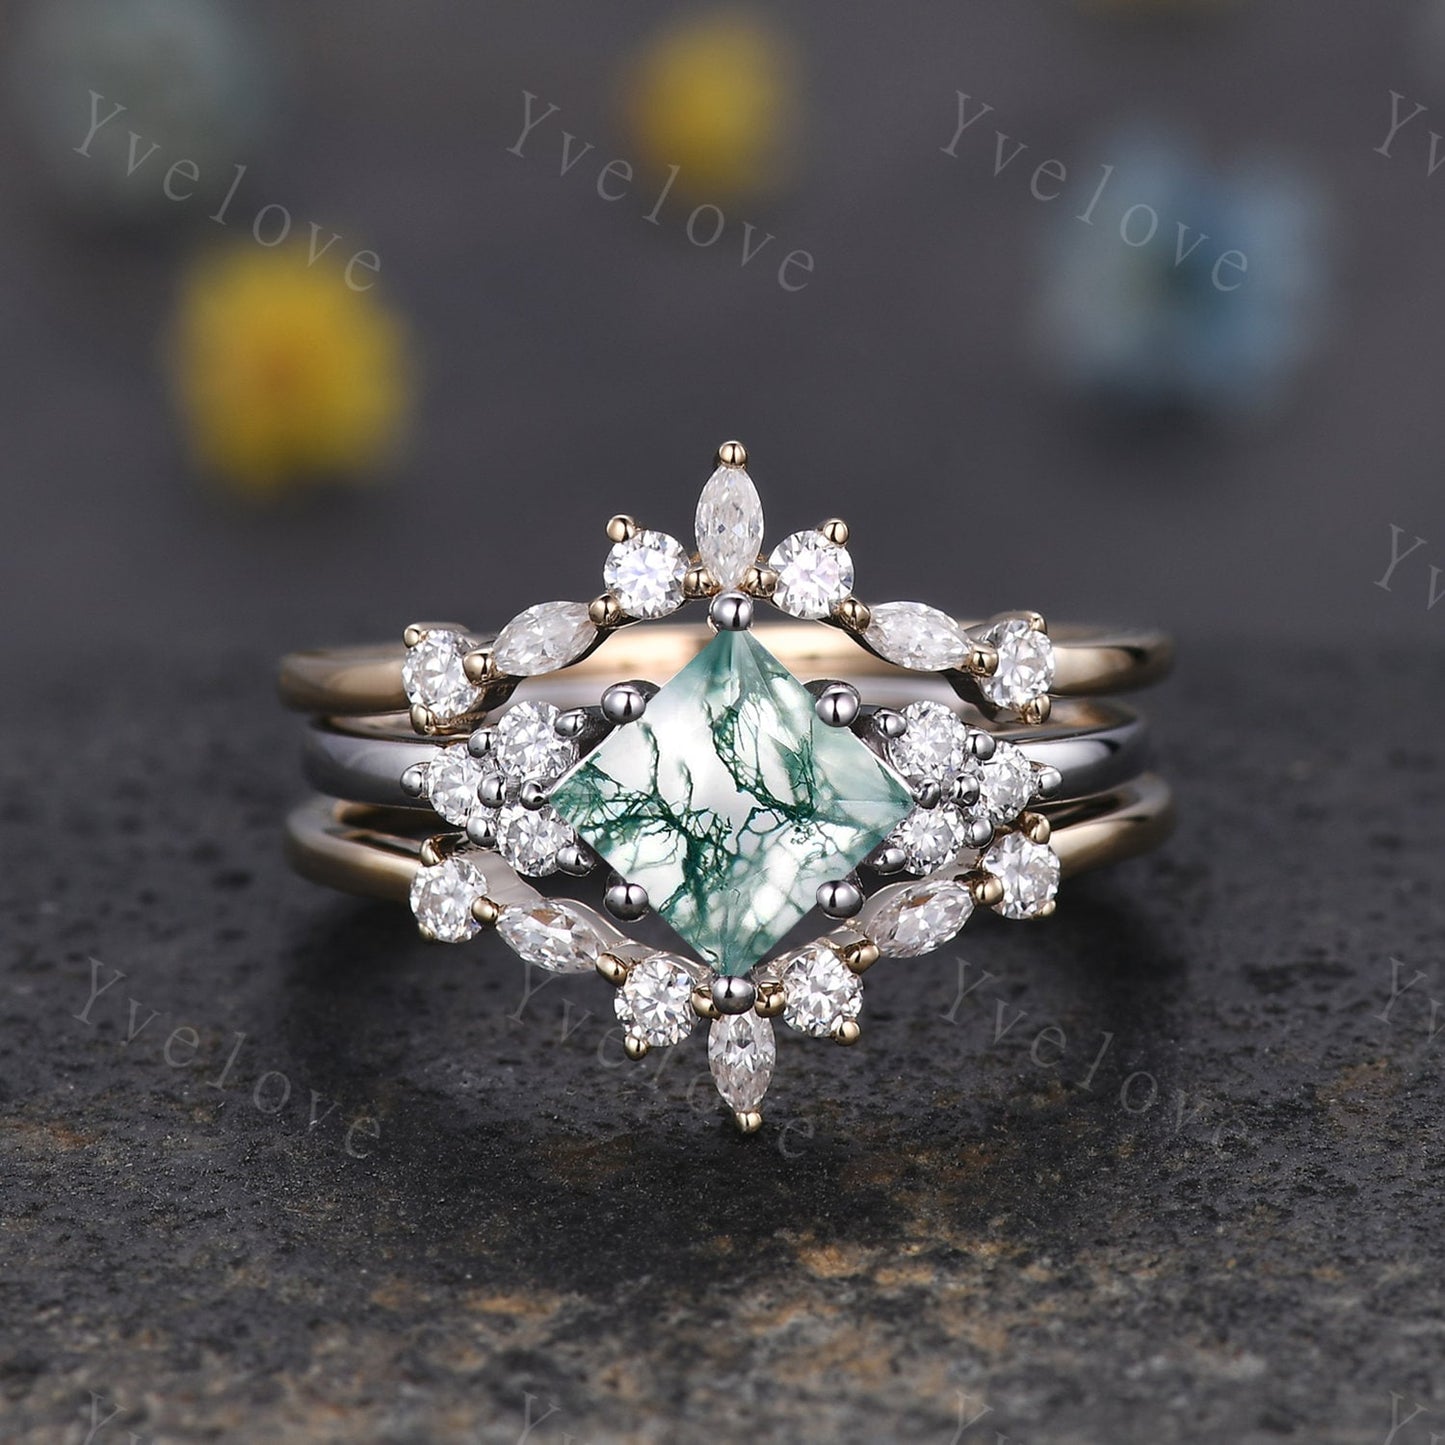 Unique Princess Cut Moss agate Ring Set,Moss Agate Engagement Ring,Enhancer Ring,Women Moissanite Bridal Stacking Double Curved Wedding band